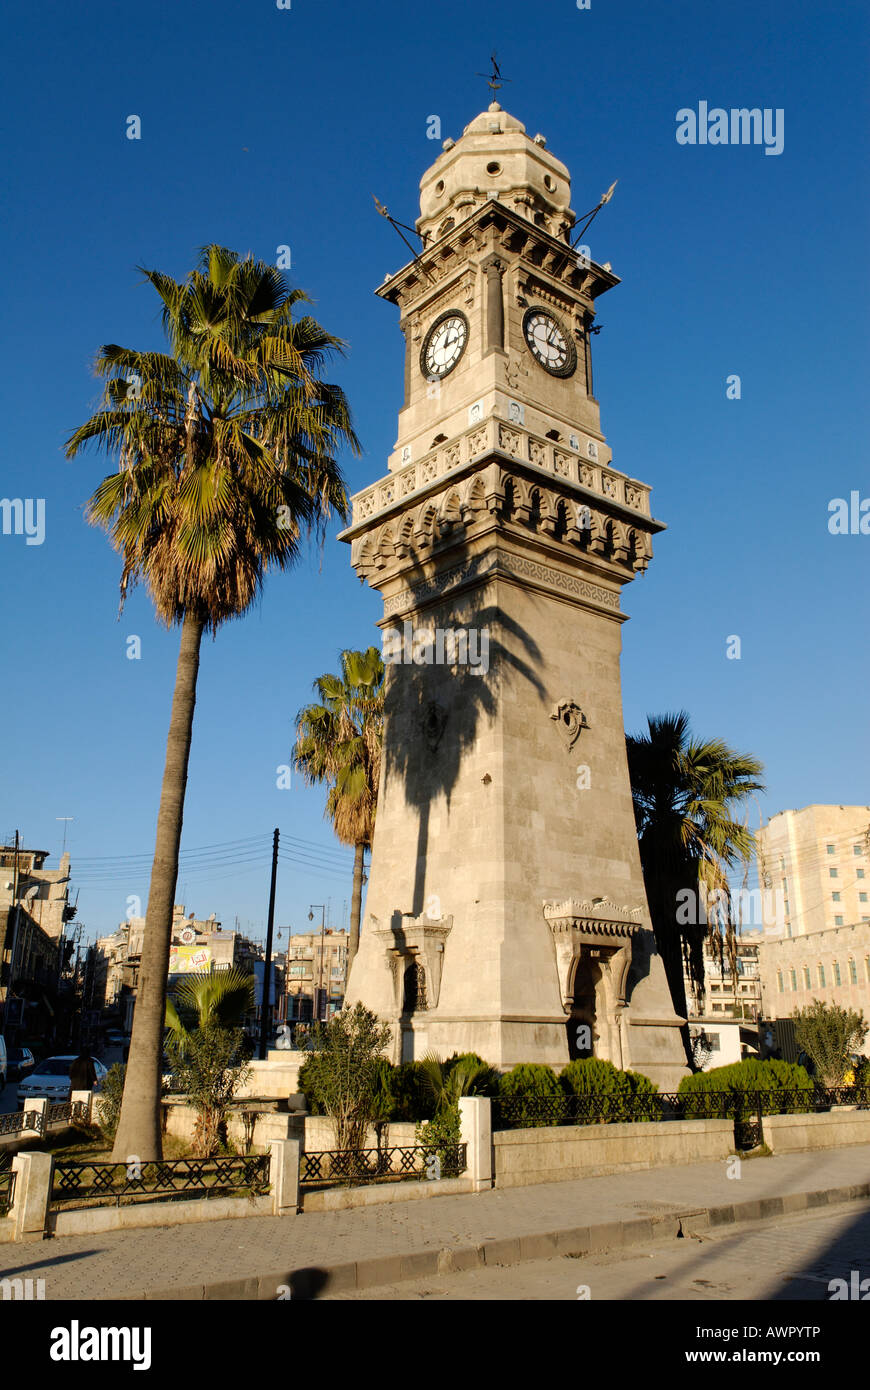 Aleppo syria clock tower hi-res stock photography and images - Alamy